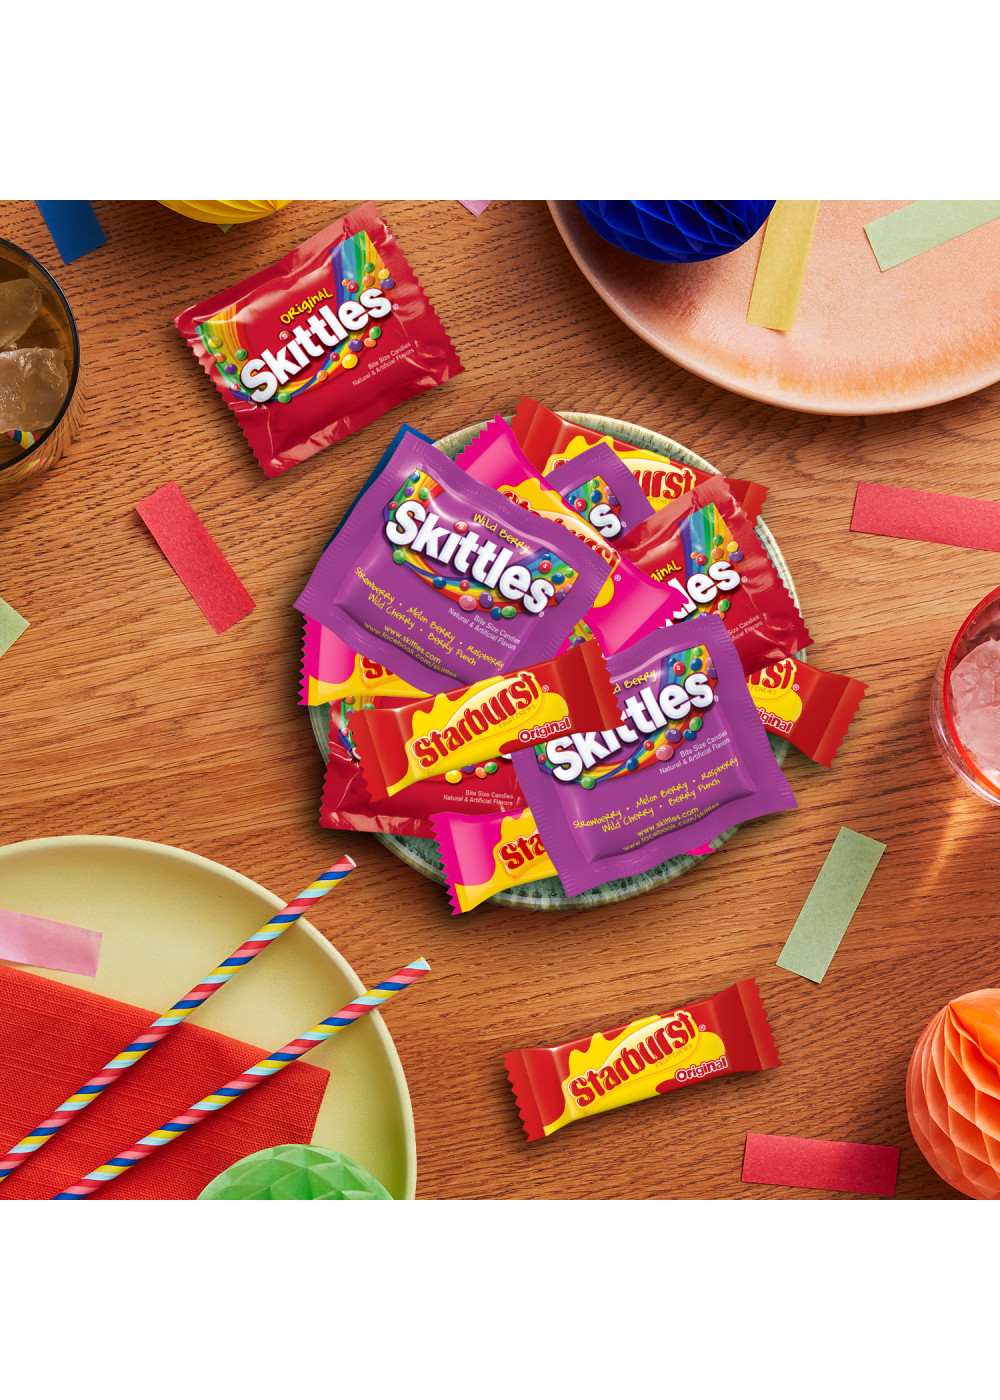 Skittles & Starburst Assorted Fun Size Candy - Party Size; image 4 of 6